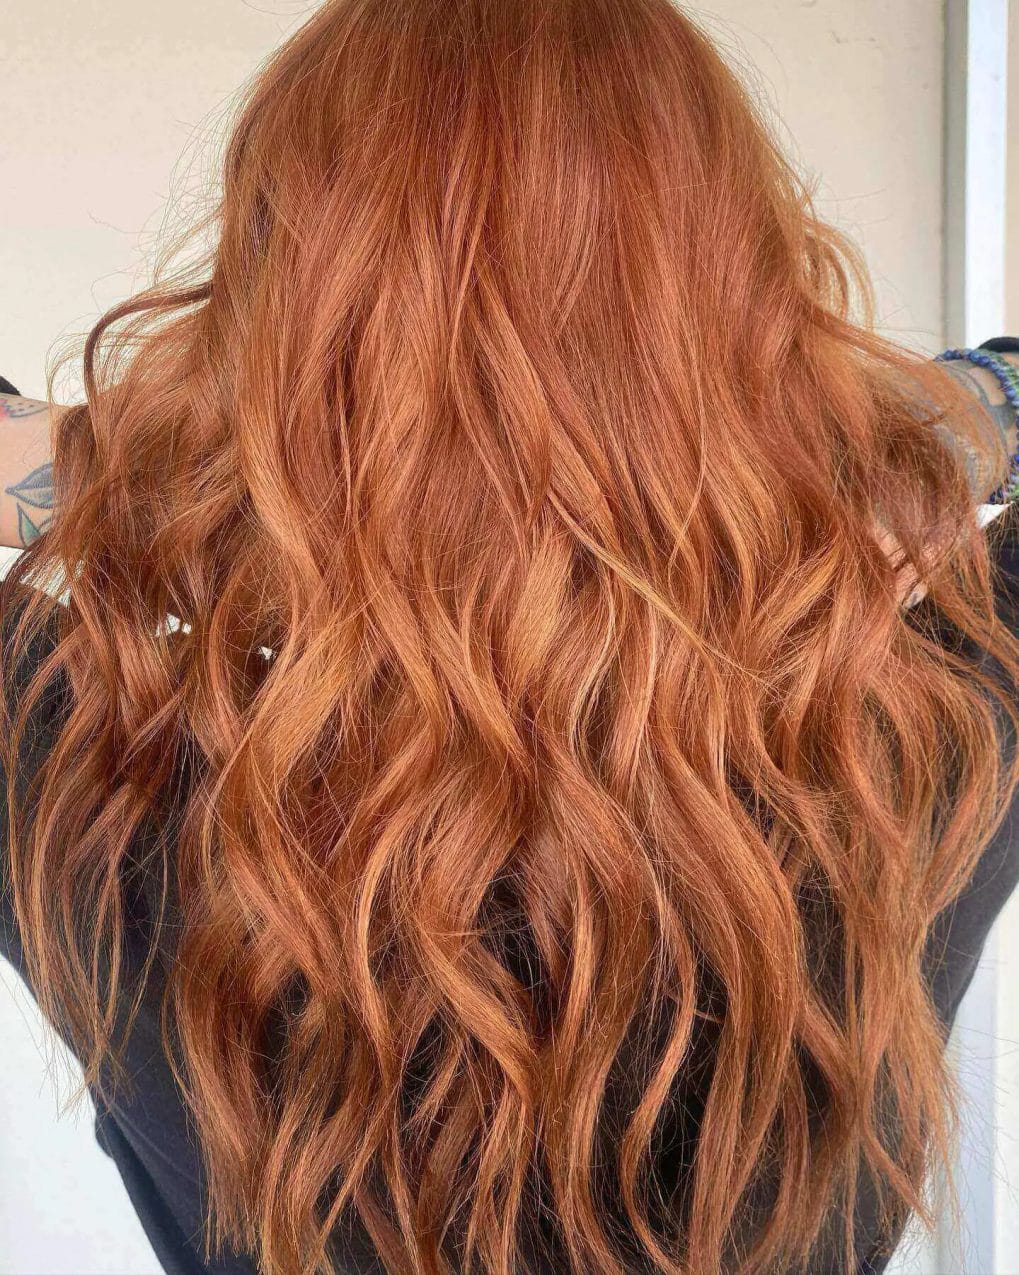 Long layers with blonde to red balayage resembling fiery waves.